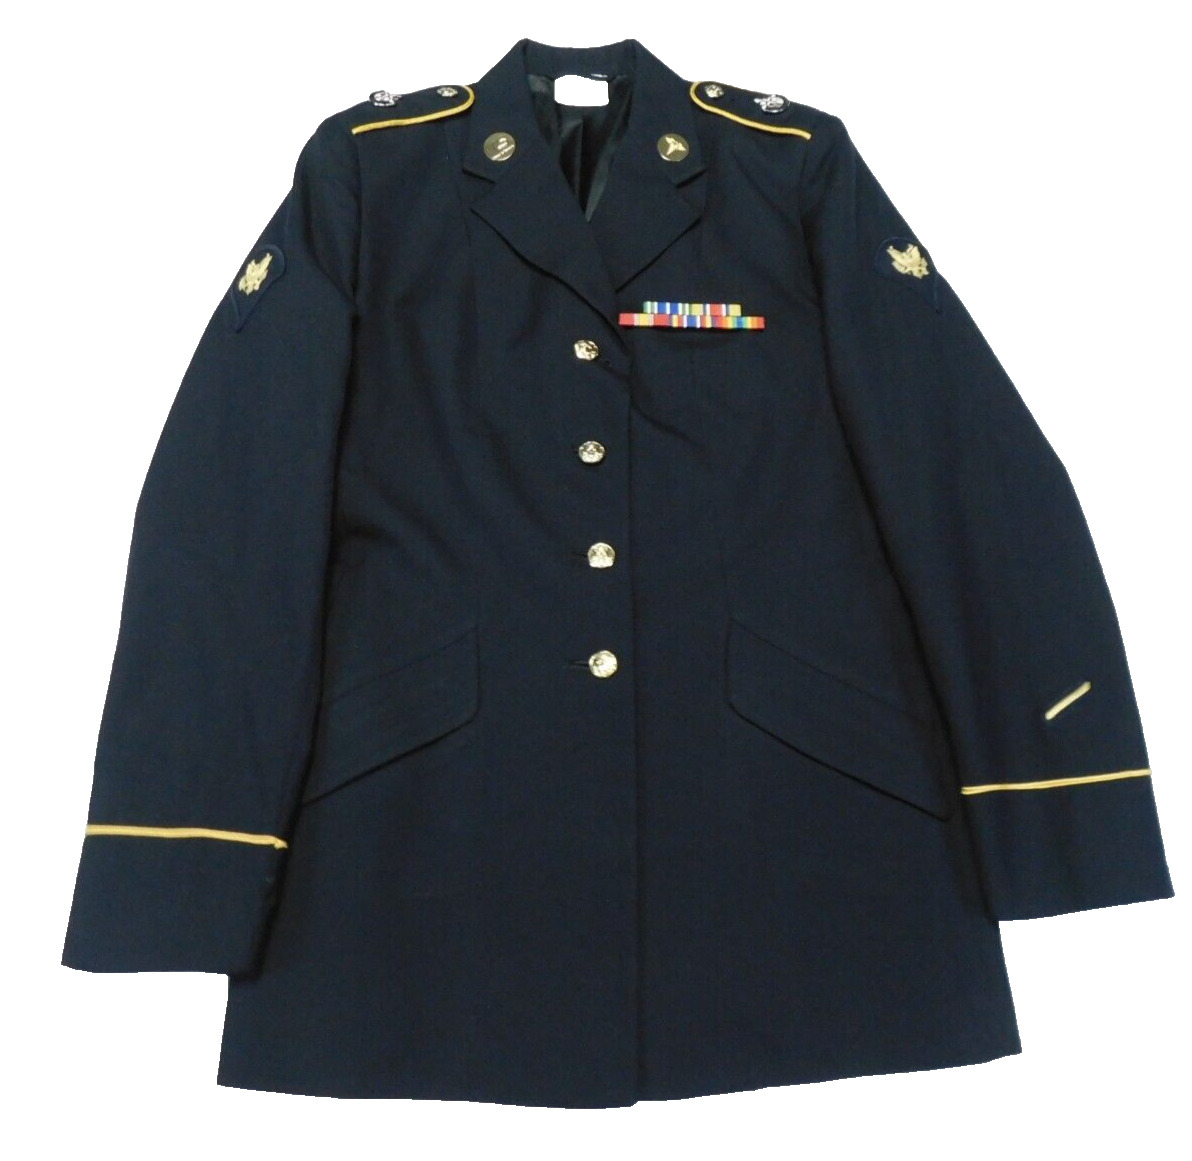 US Army ASU Coat 12 MT Women's Dress Blue 450 Poly/Wool Service Decorated Jacket